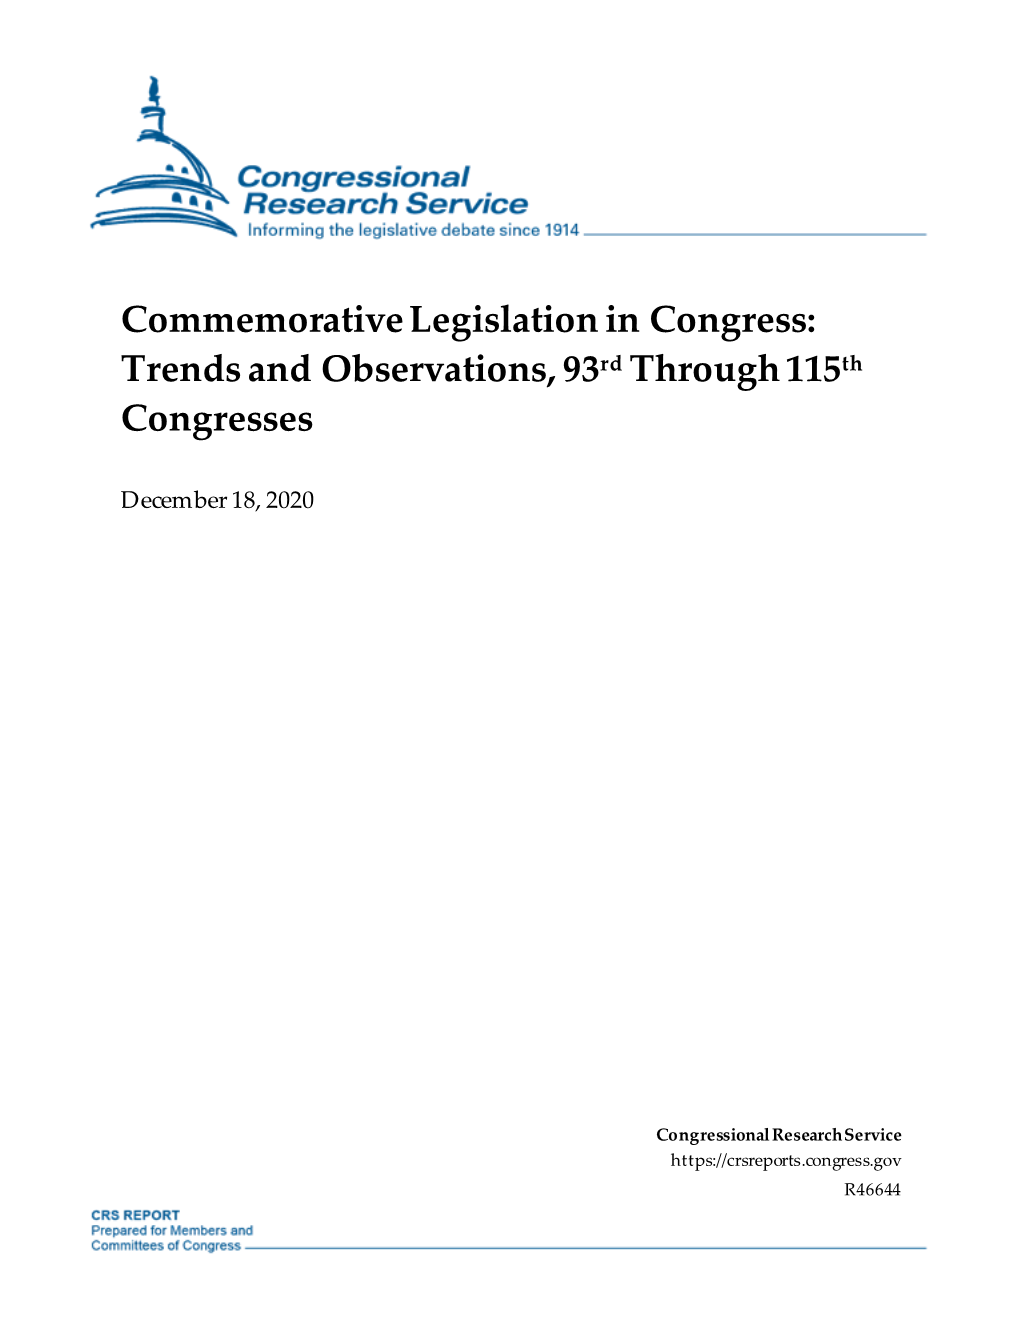 Commemorative Legislation in Congress: Trends and Observations, 93Rd Through 115Th Congresses